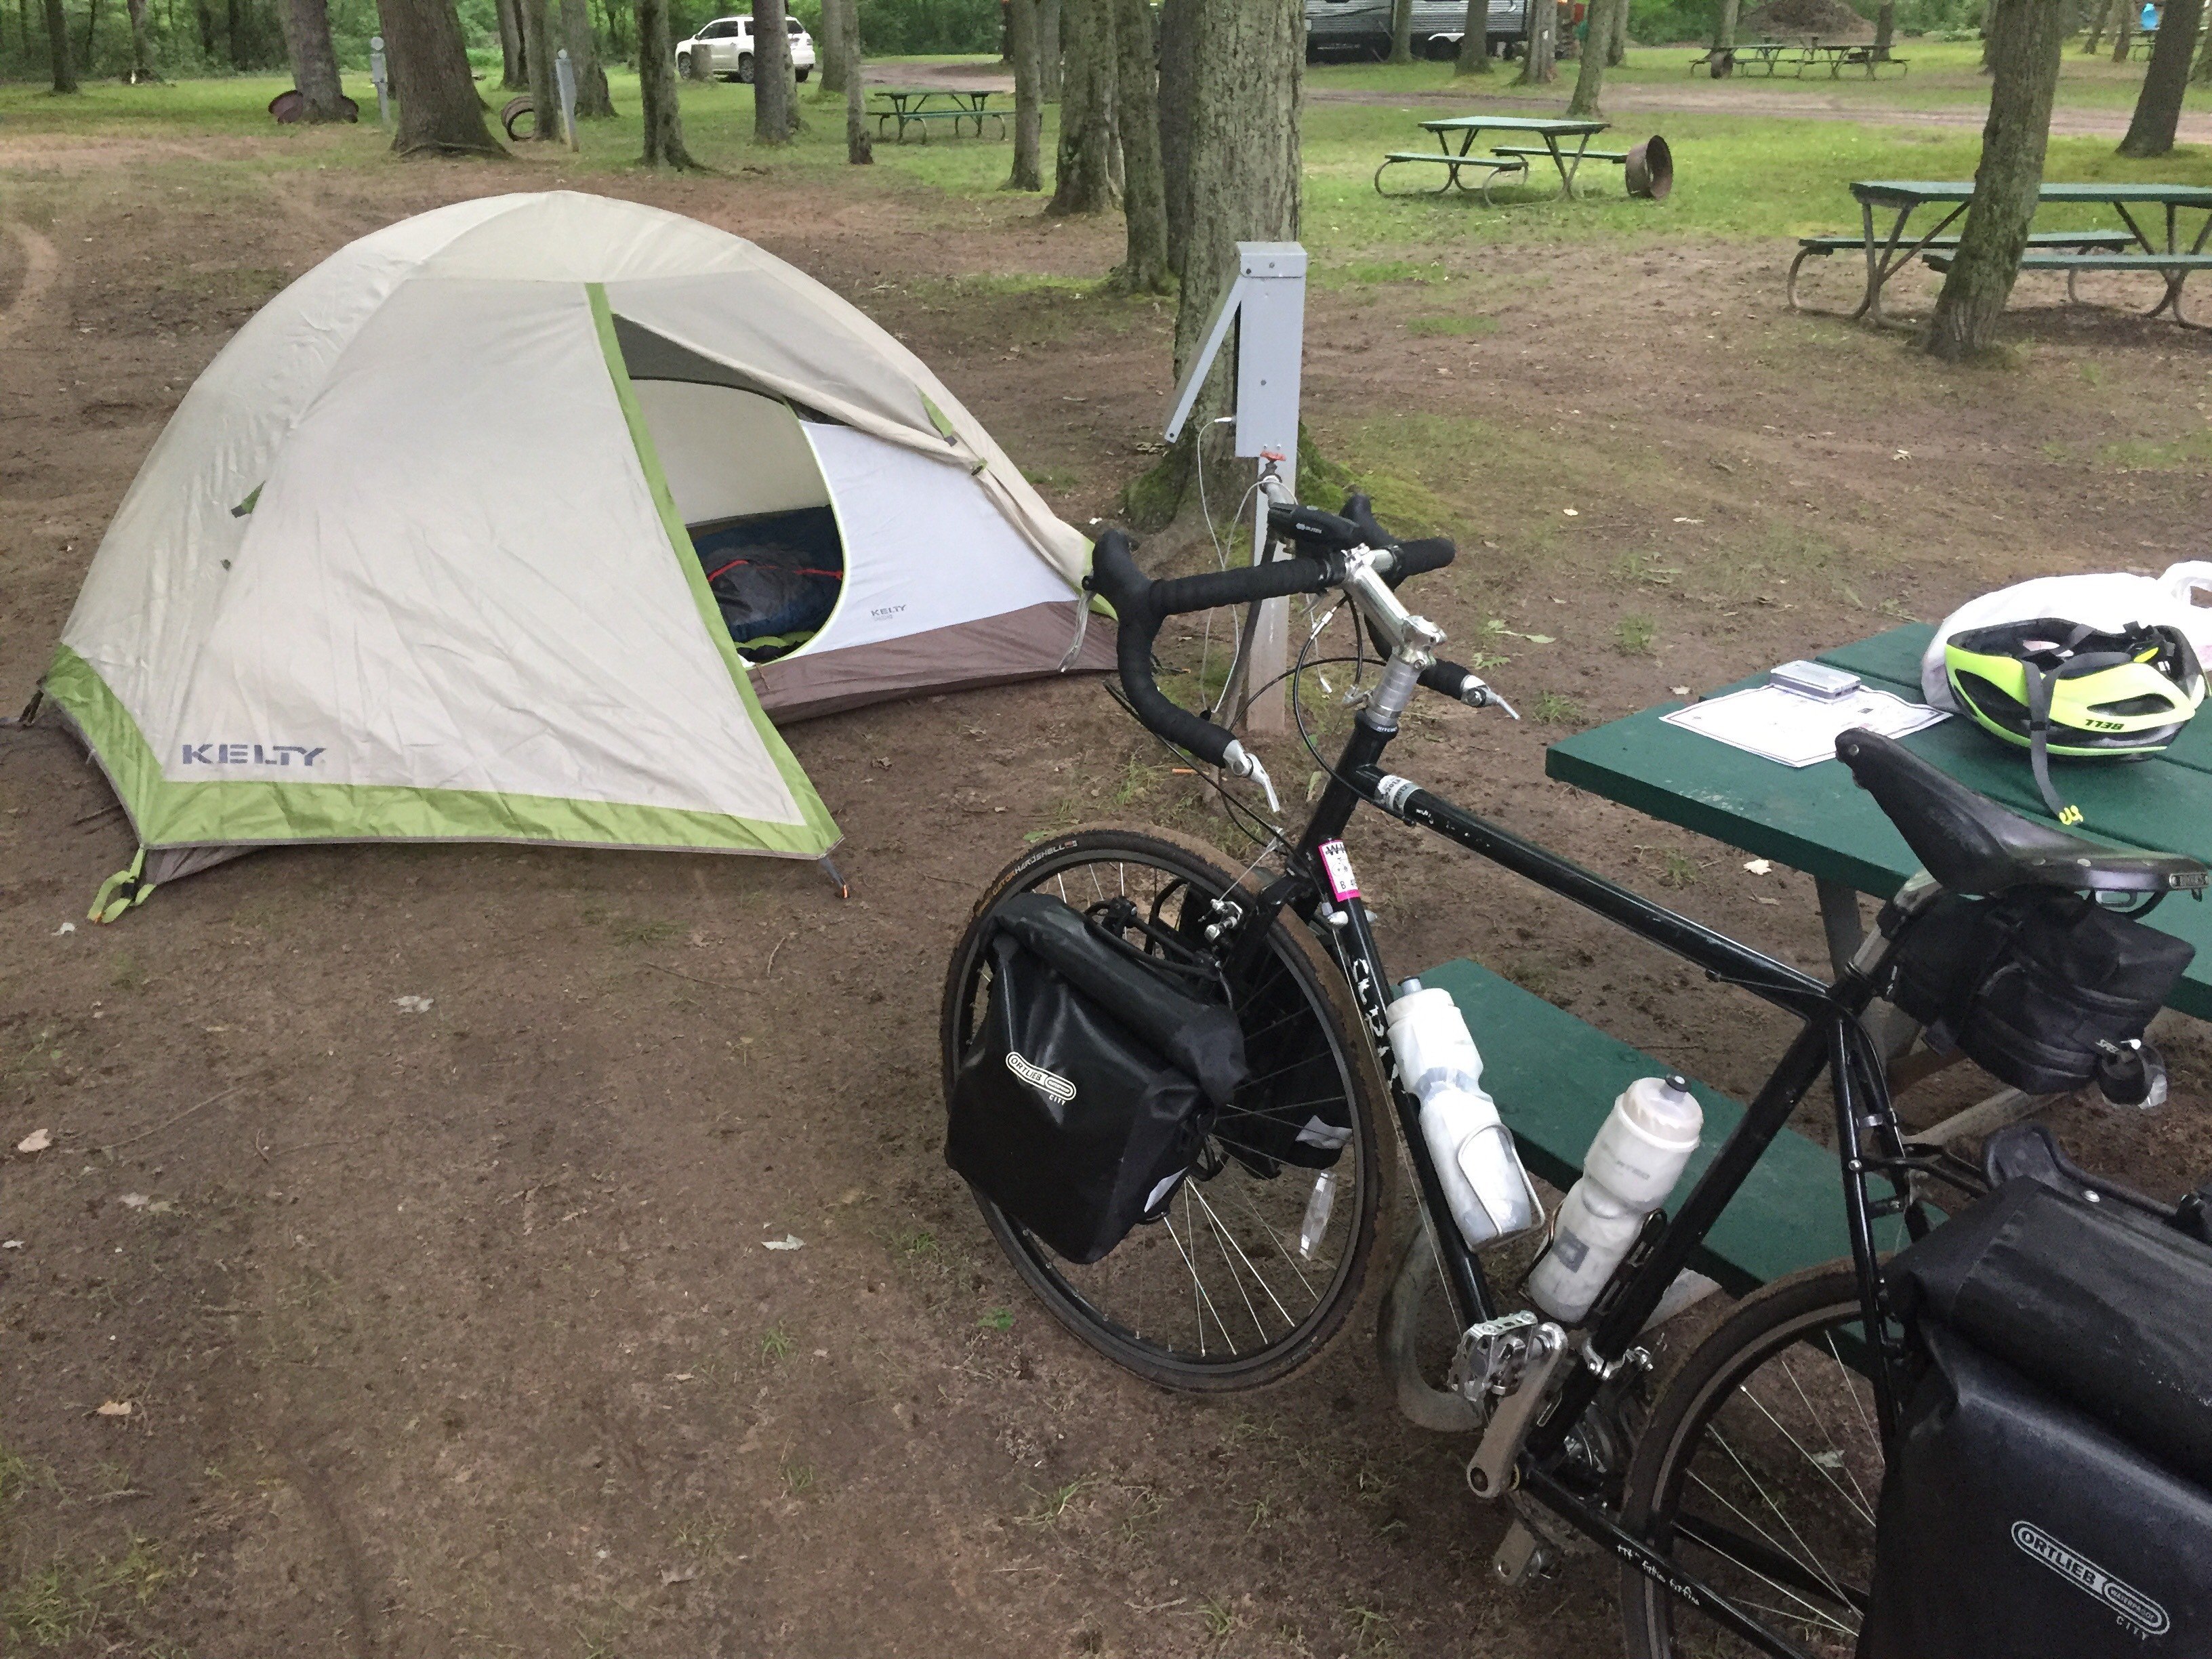 Neil's tent and bike along the Ride2CW path